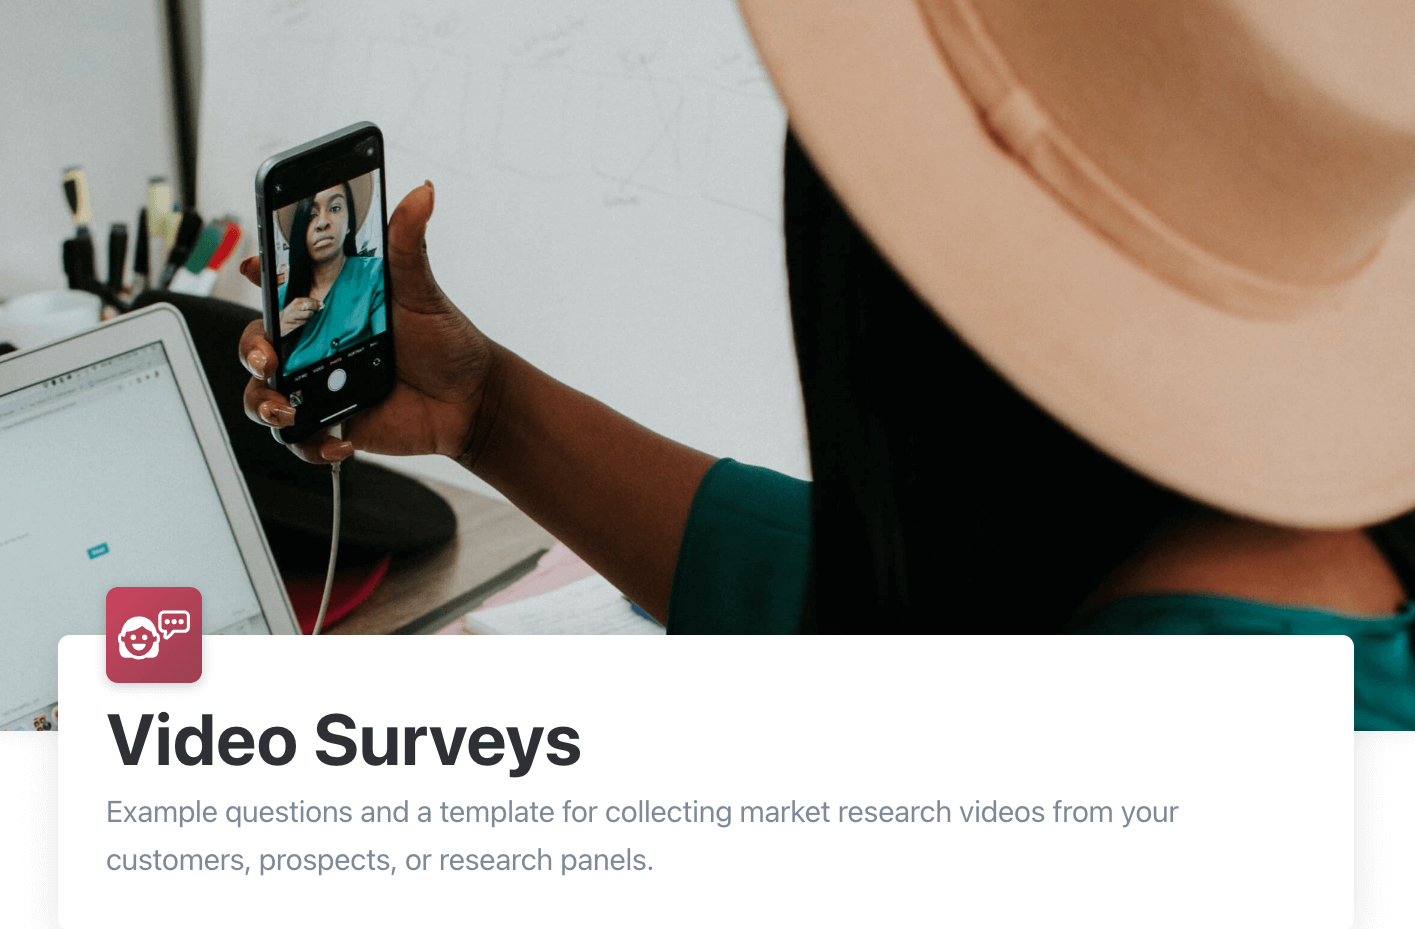 Video Surveys: Example questions and a template for collecting market research videos from your customers, prospects, or research panels.